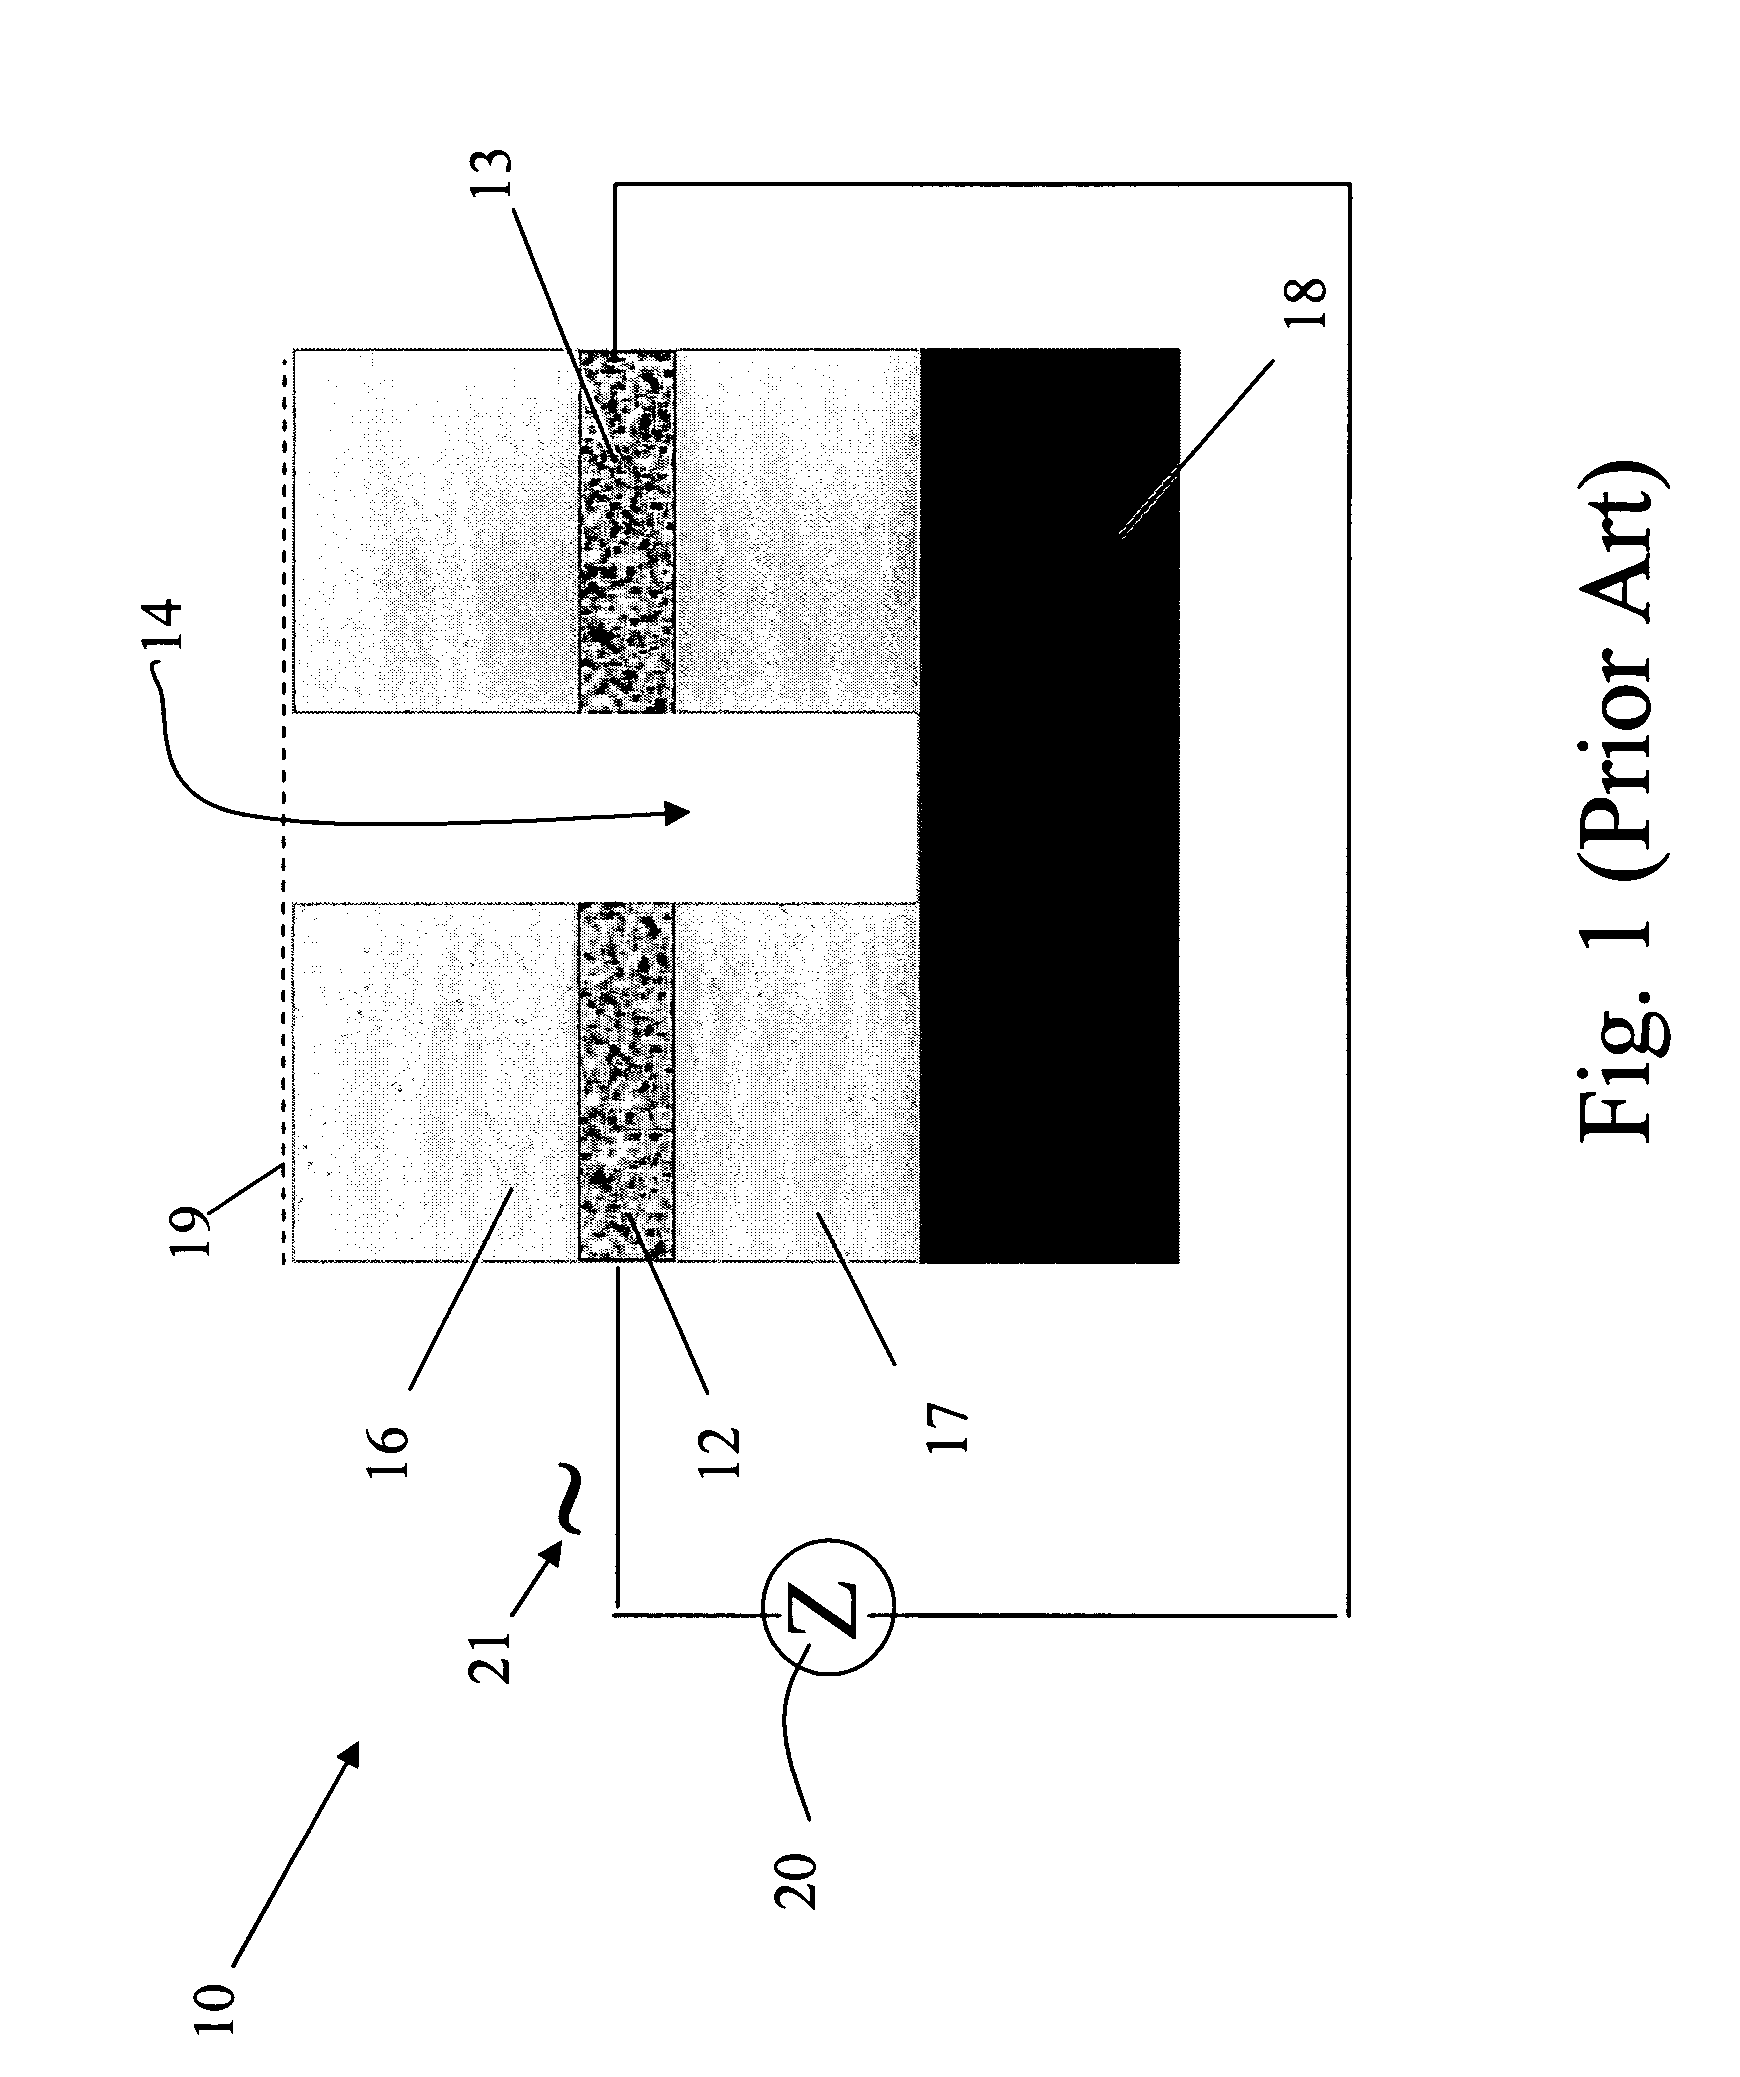 Micro sensor for electrochemically monitoring residue in micro channels